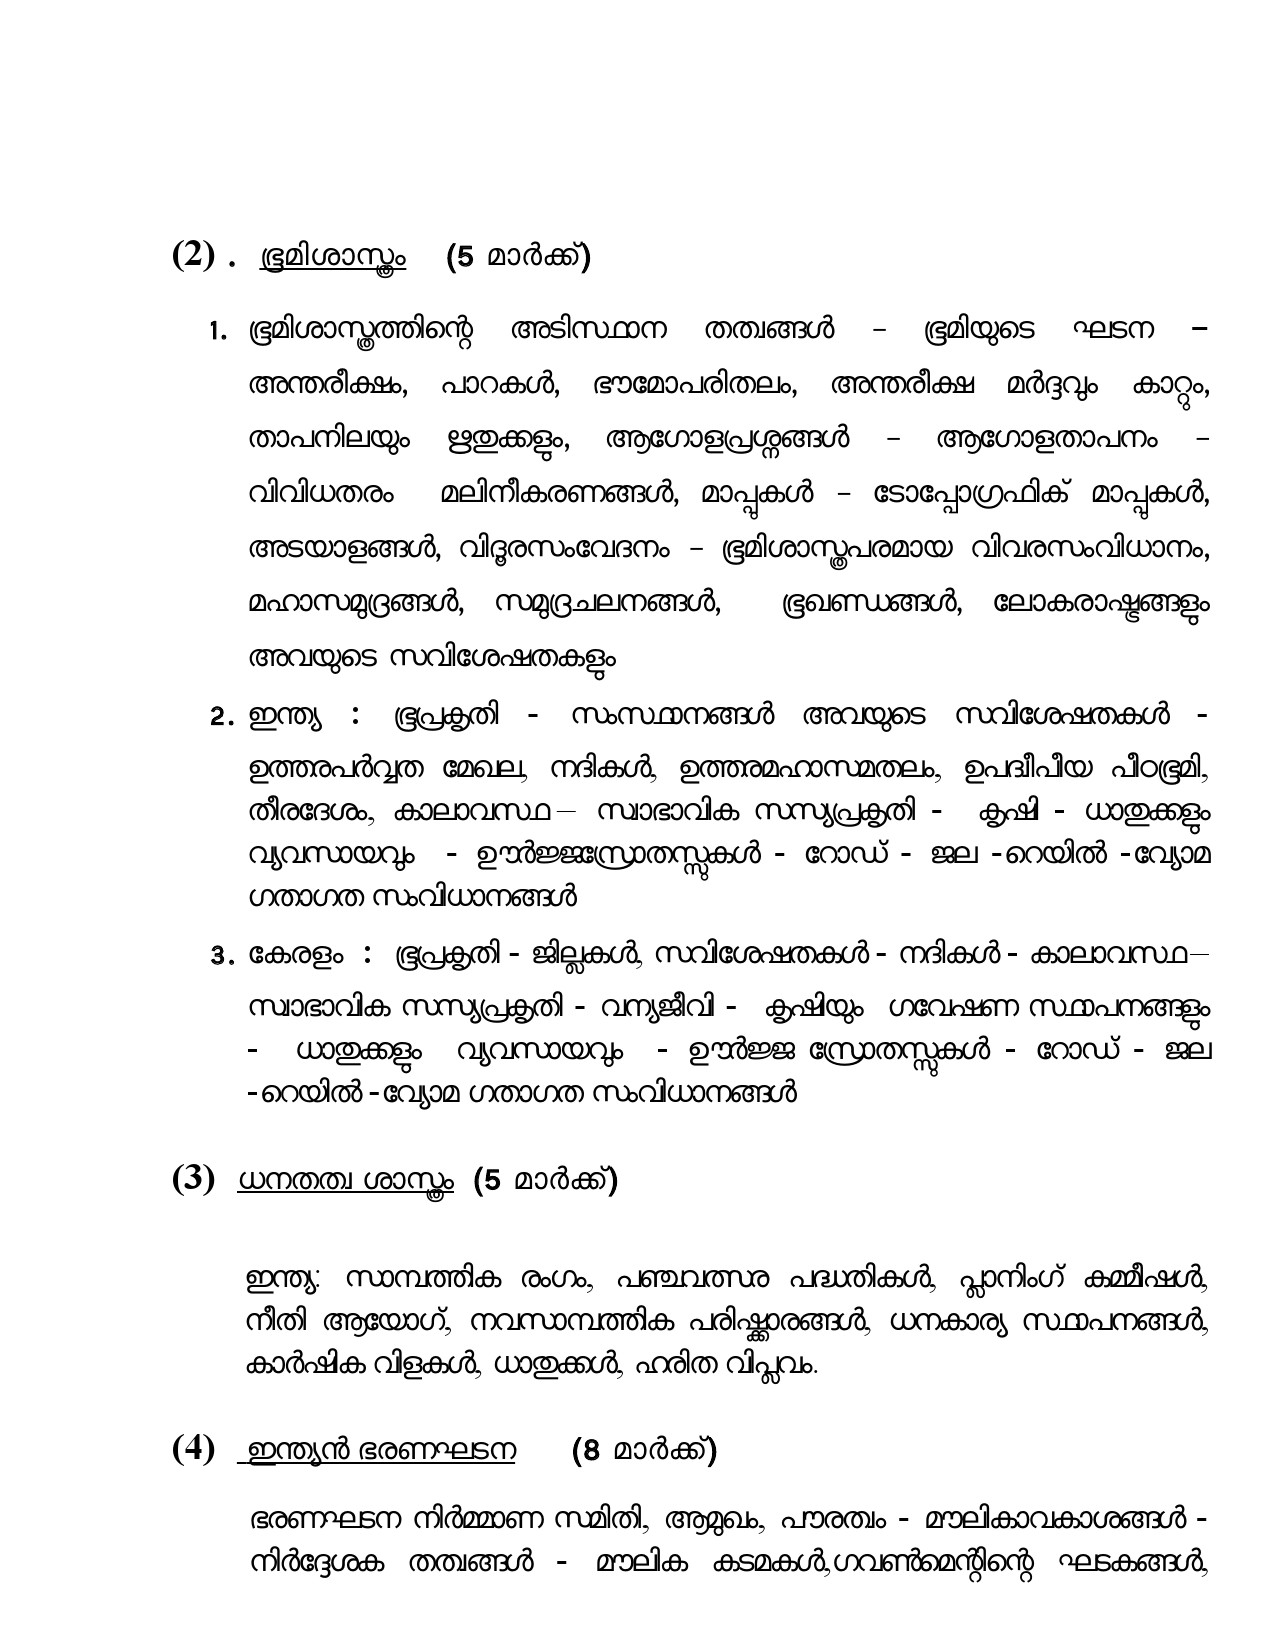 Civil Police Officer Final Examination Syllabus For Plus Two Level - Notification Image 3